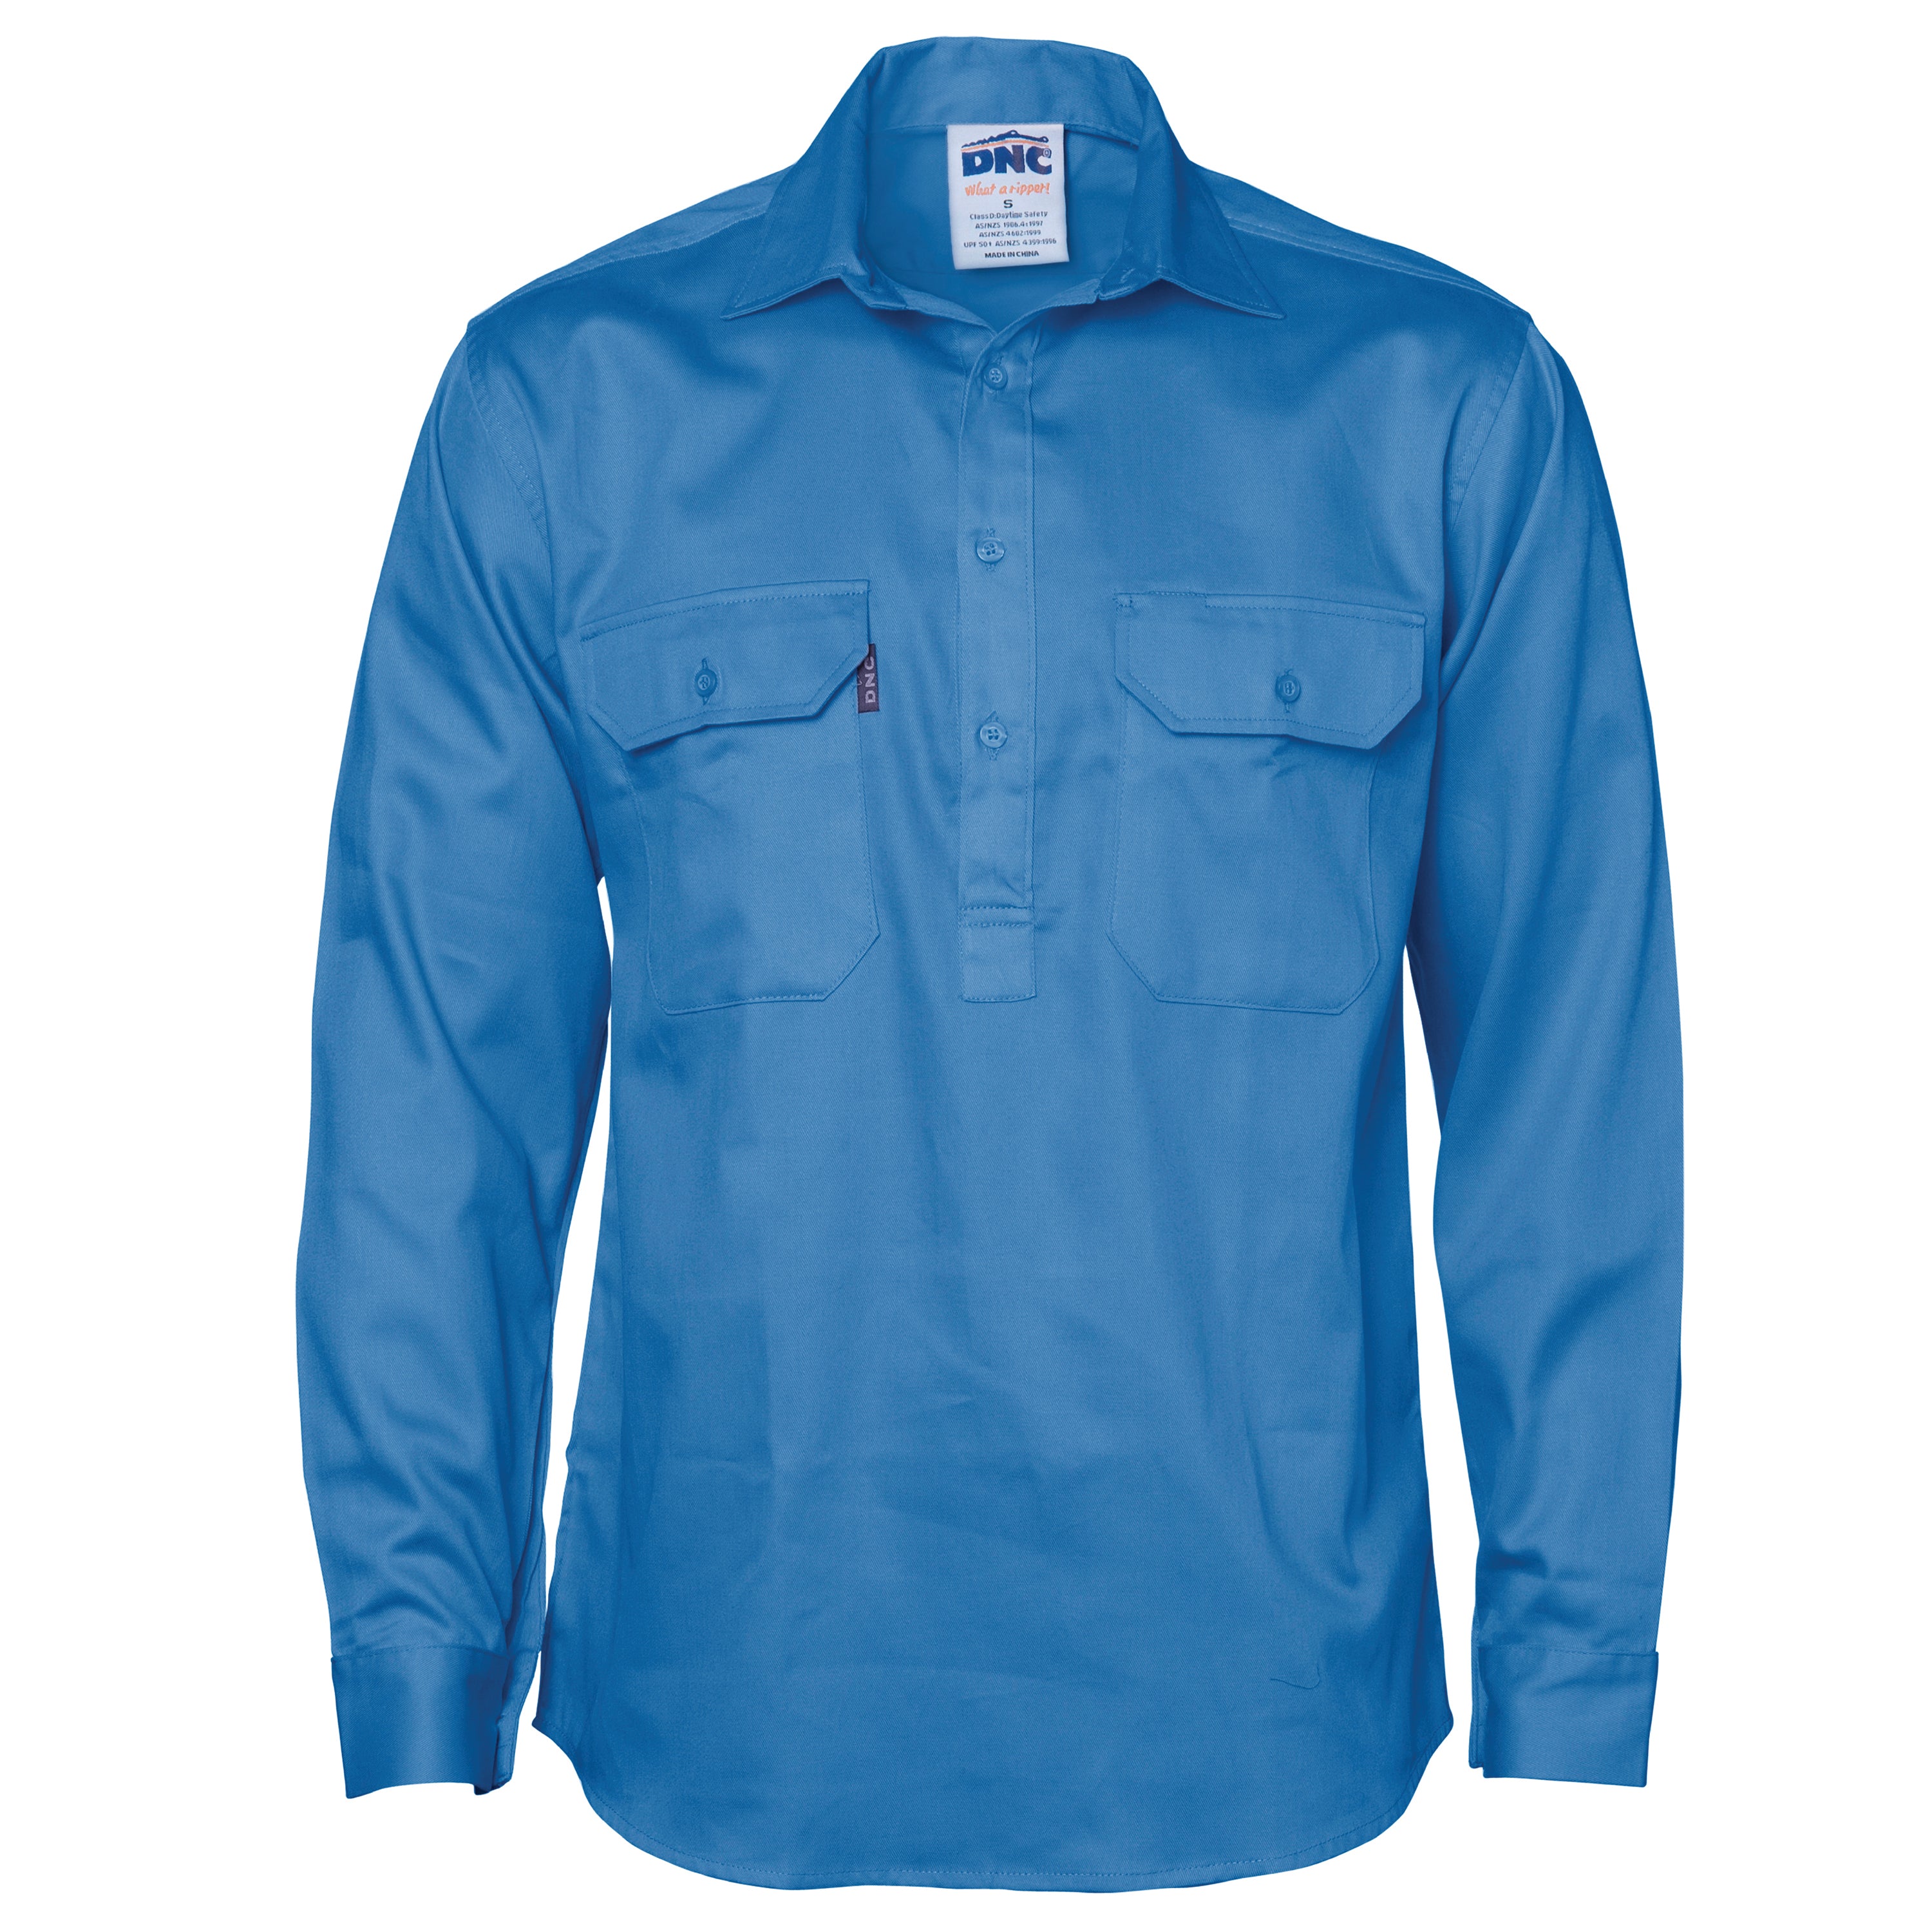 DNC 3204 Closed Front Cotton Drill Shirt Long Sleeve